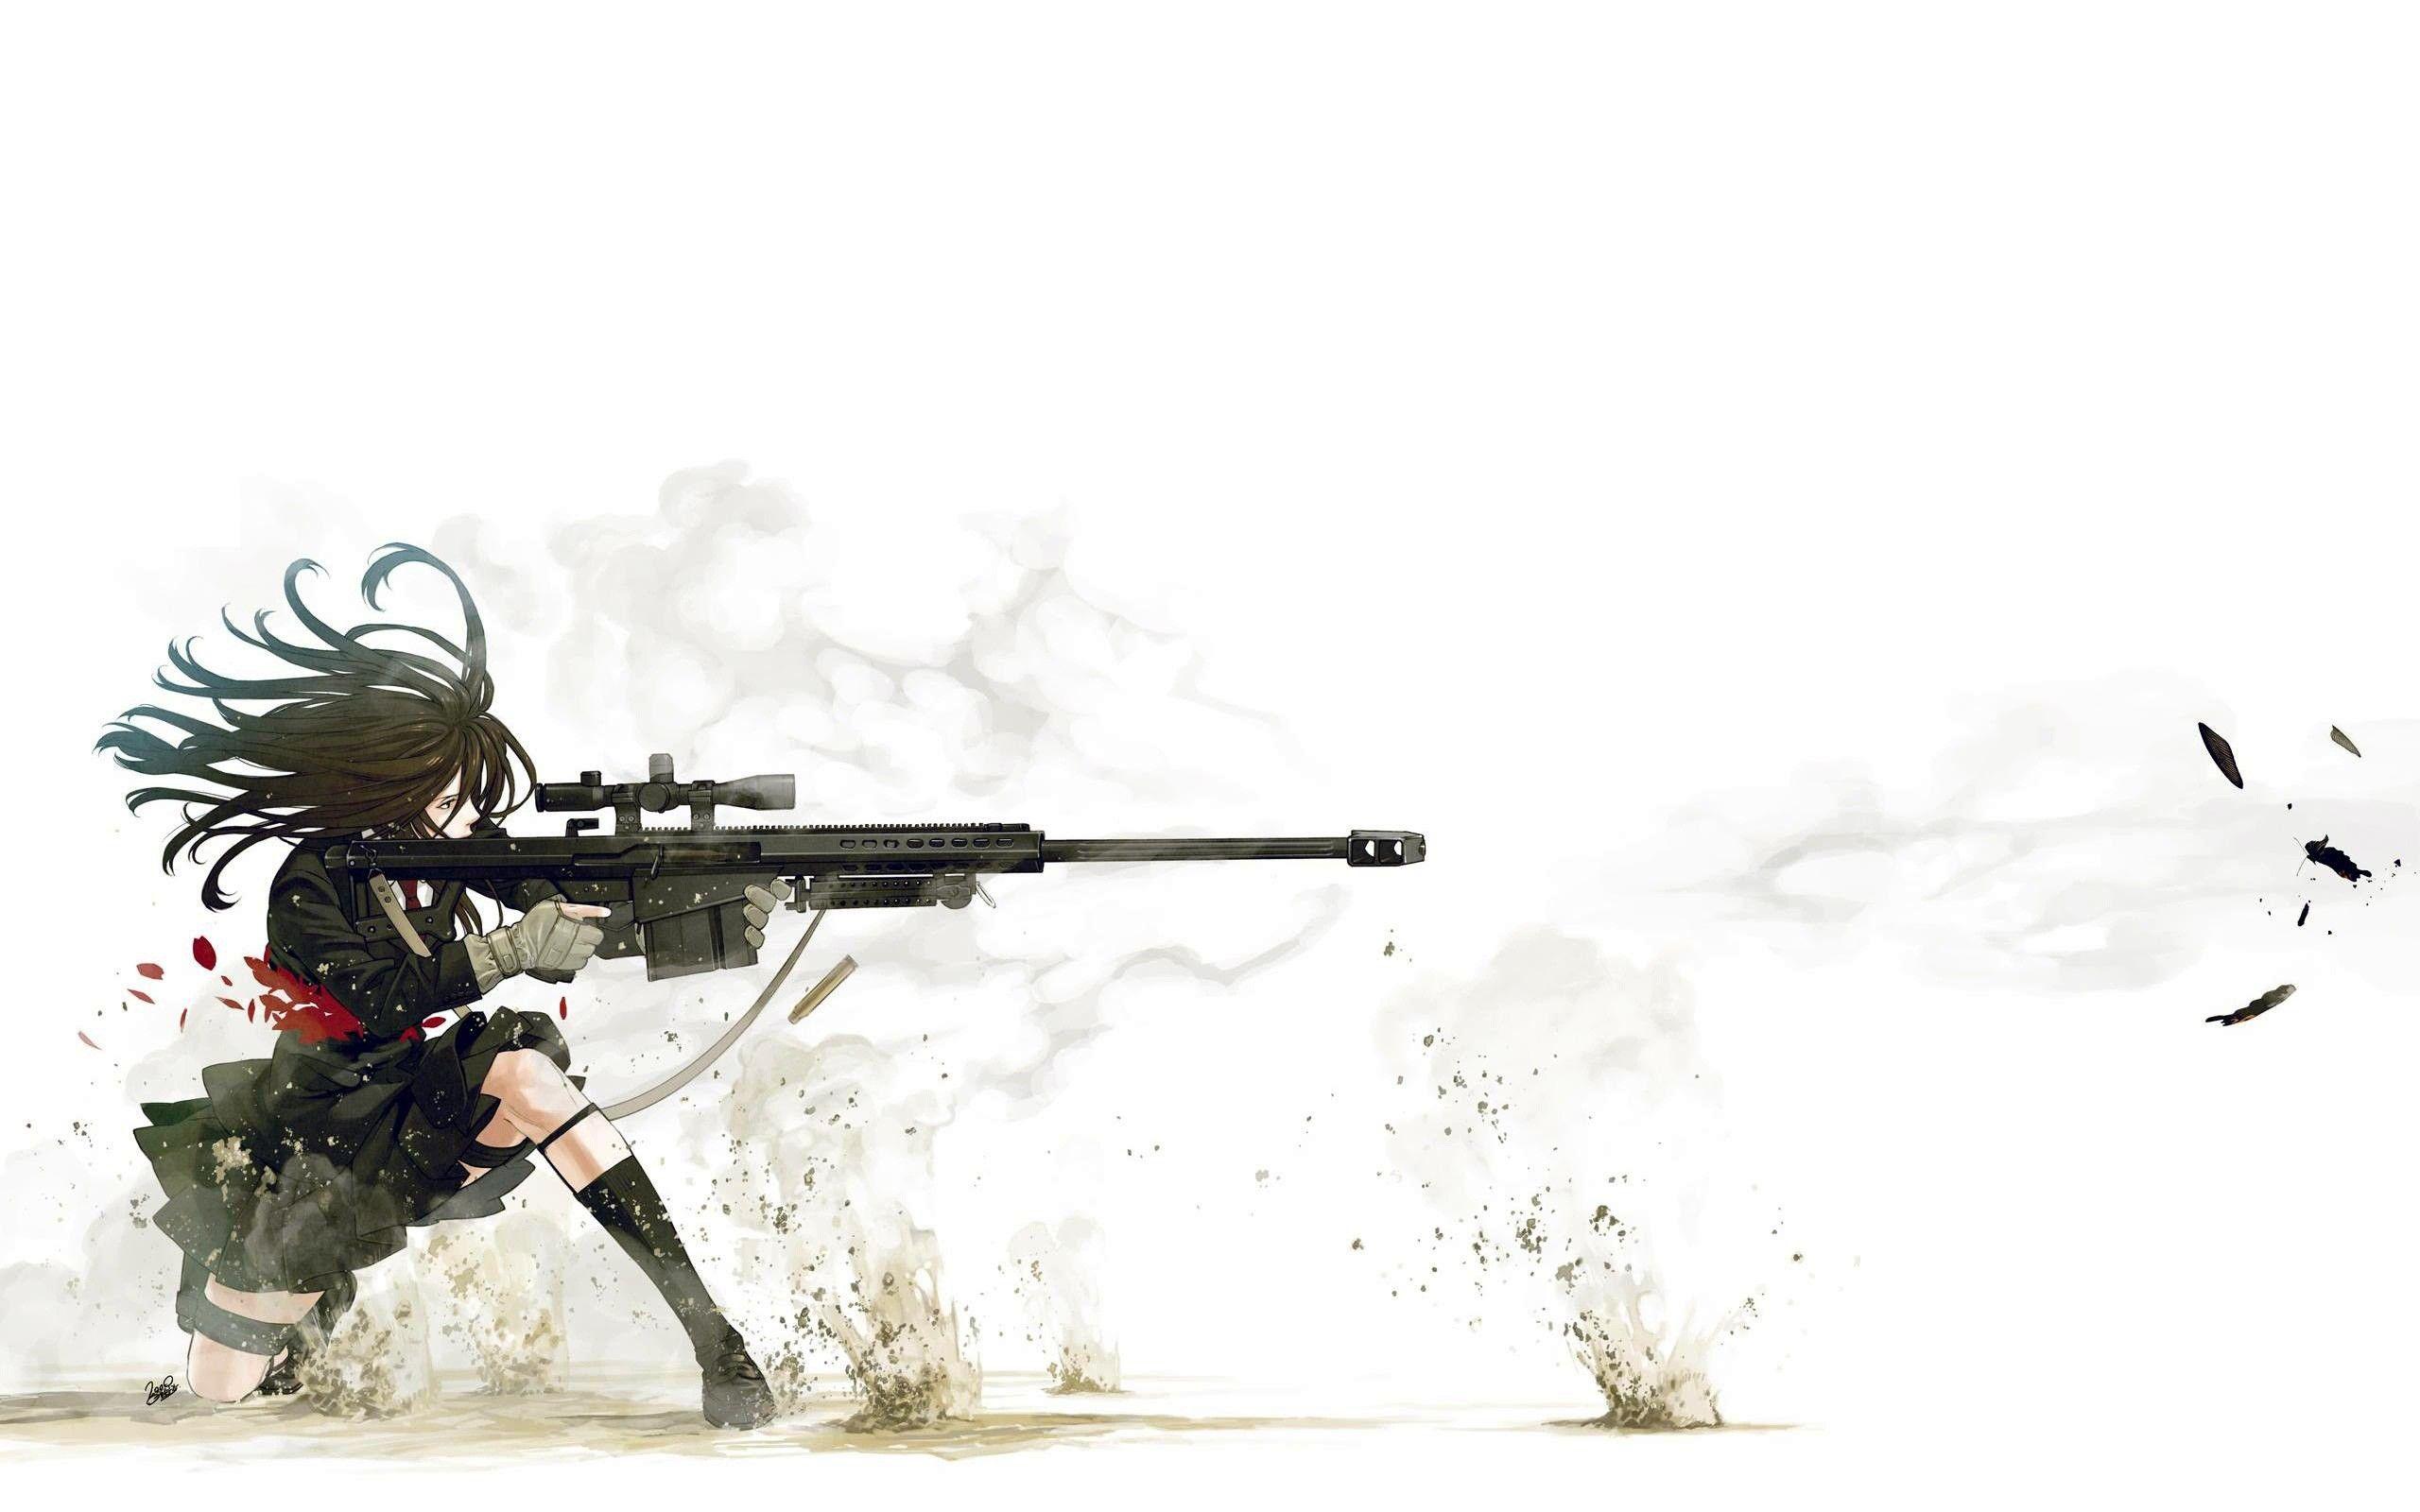 Res: 2560x Anime Sniper Wallpaper. 銃 イラスト, アート